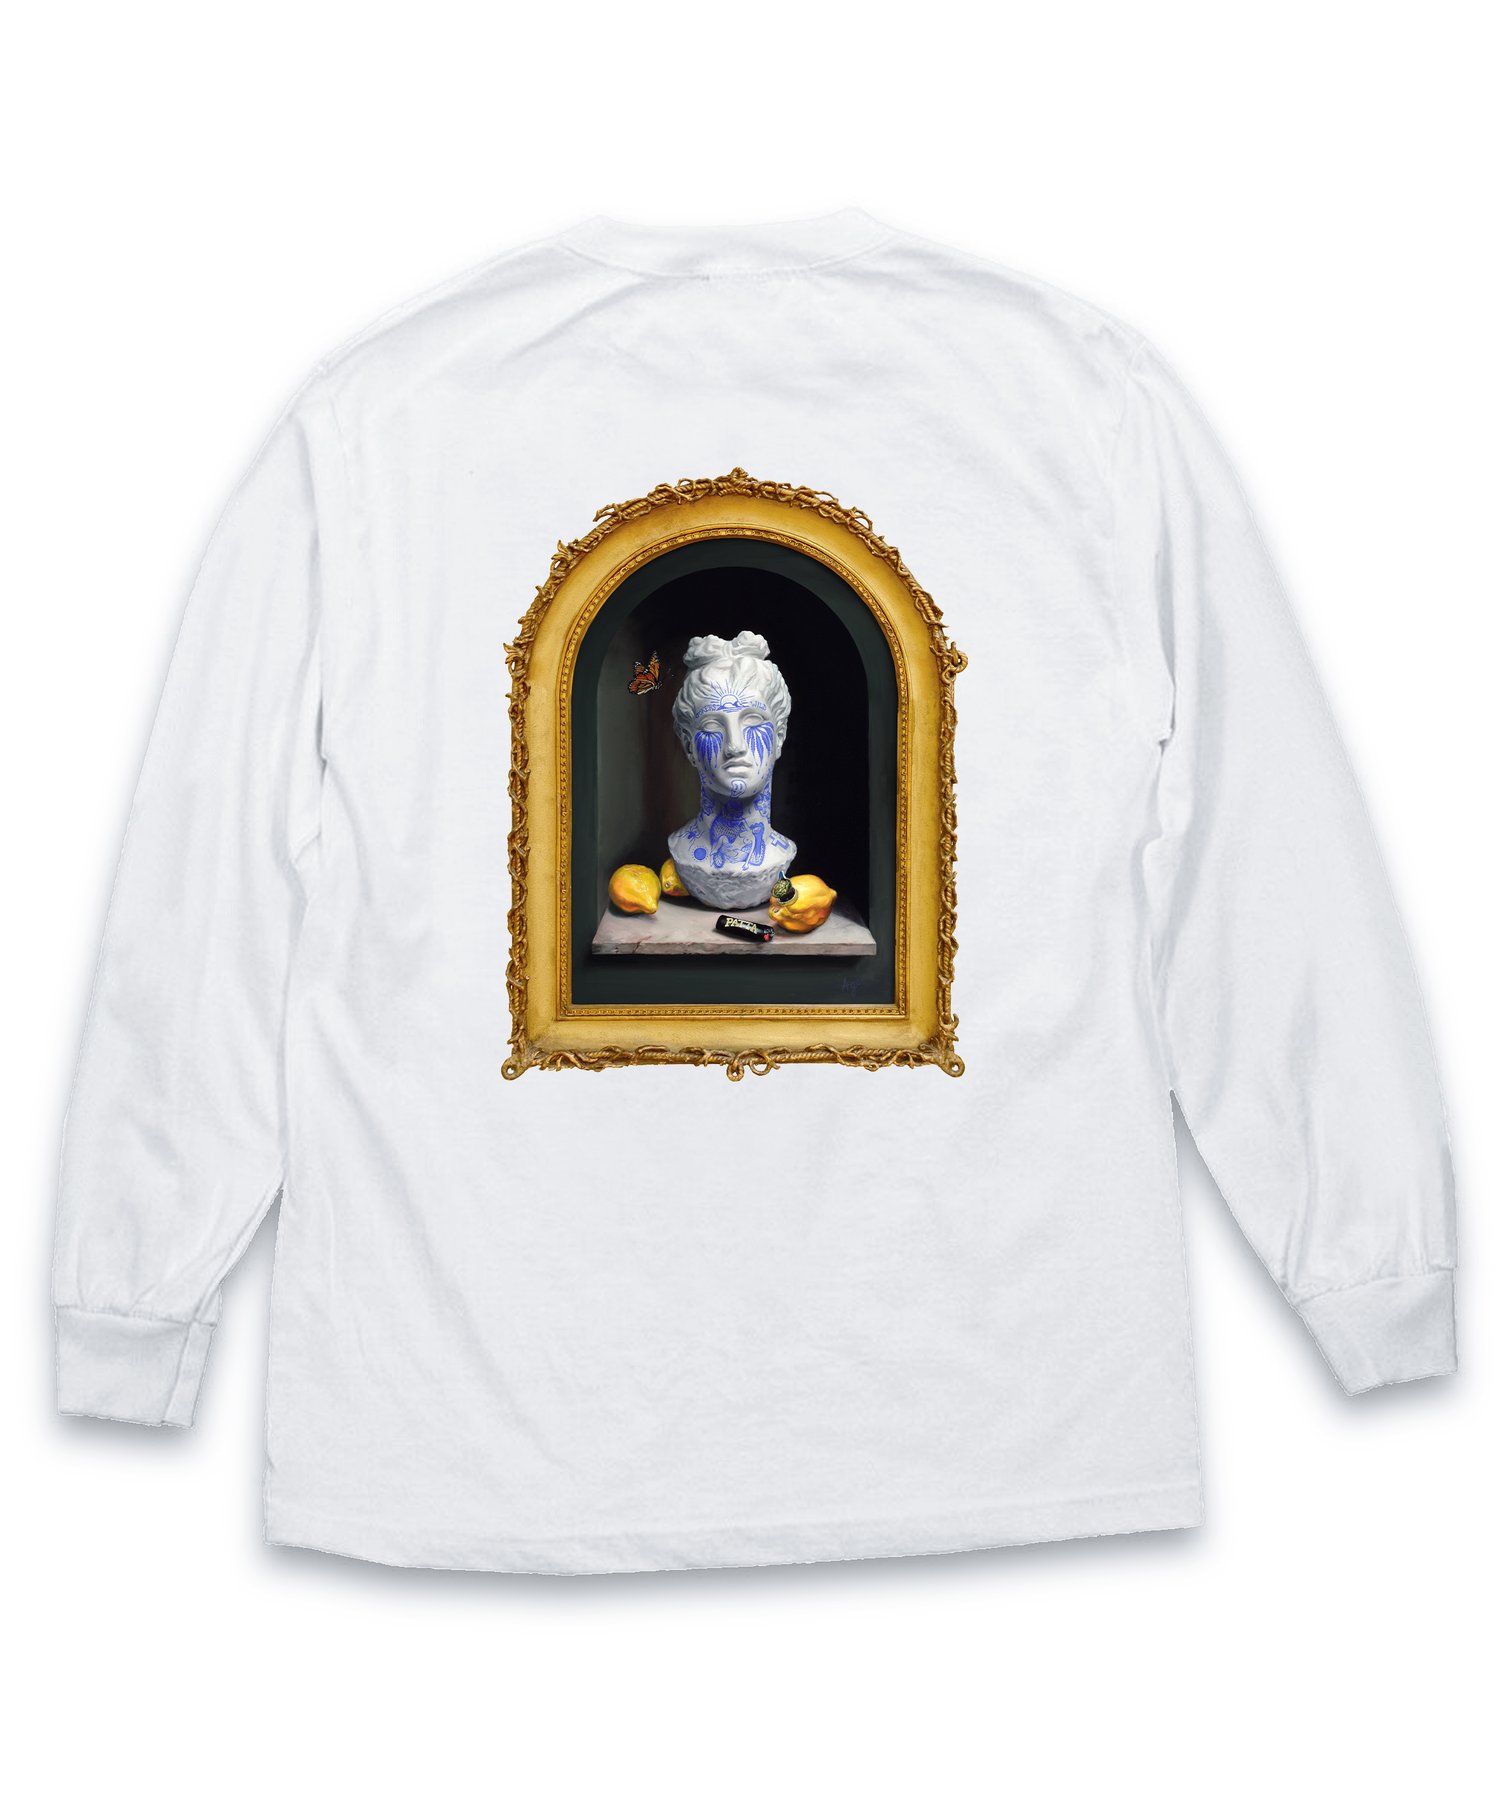 Image of "WHY SO SERIOUS?" Framed Long Sleeve T-Shirt